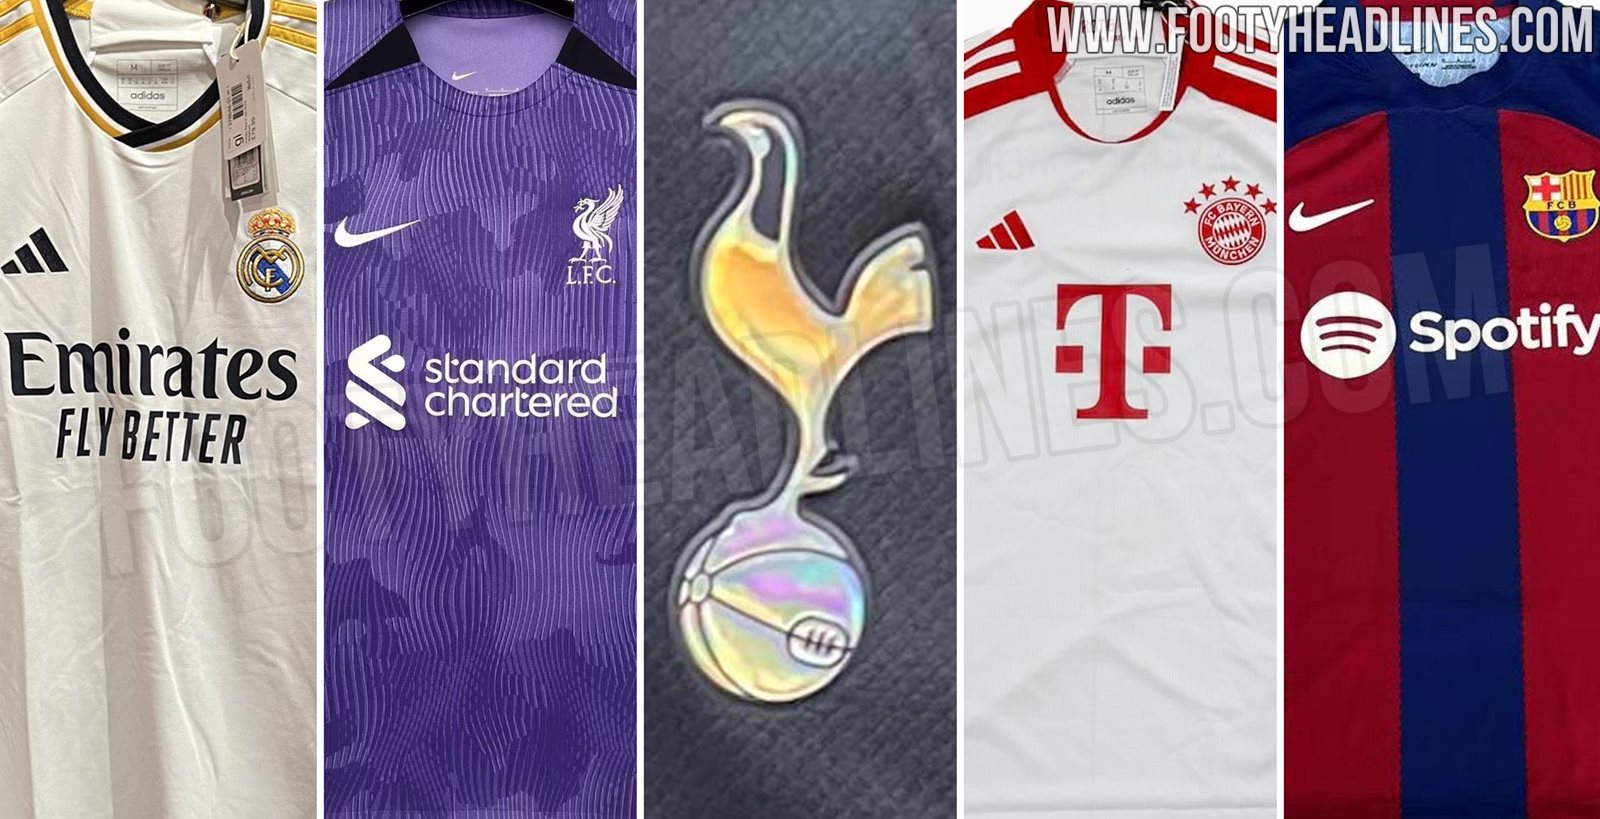 Another Tottenham third kit has leaked, and this one is probably